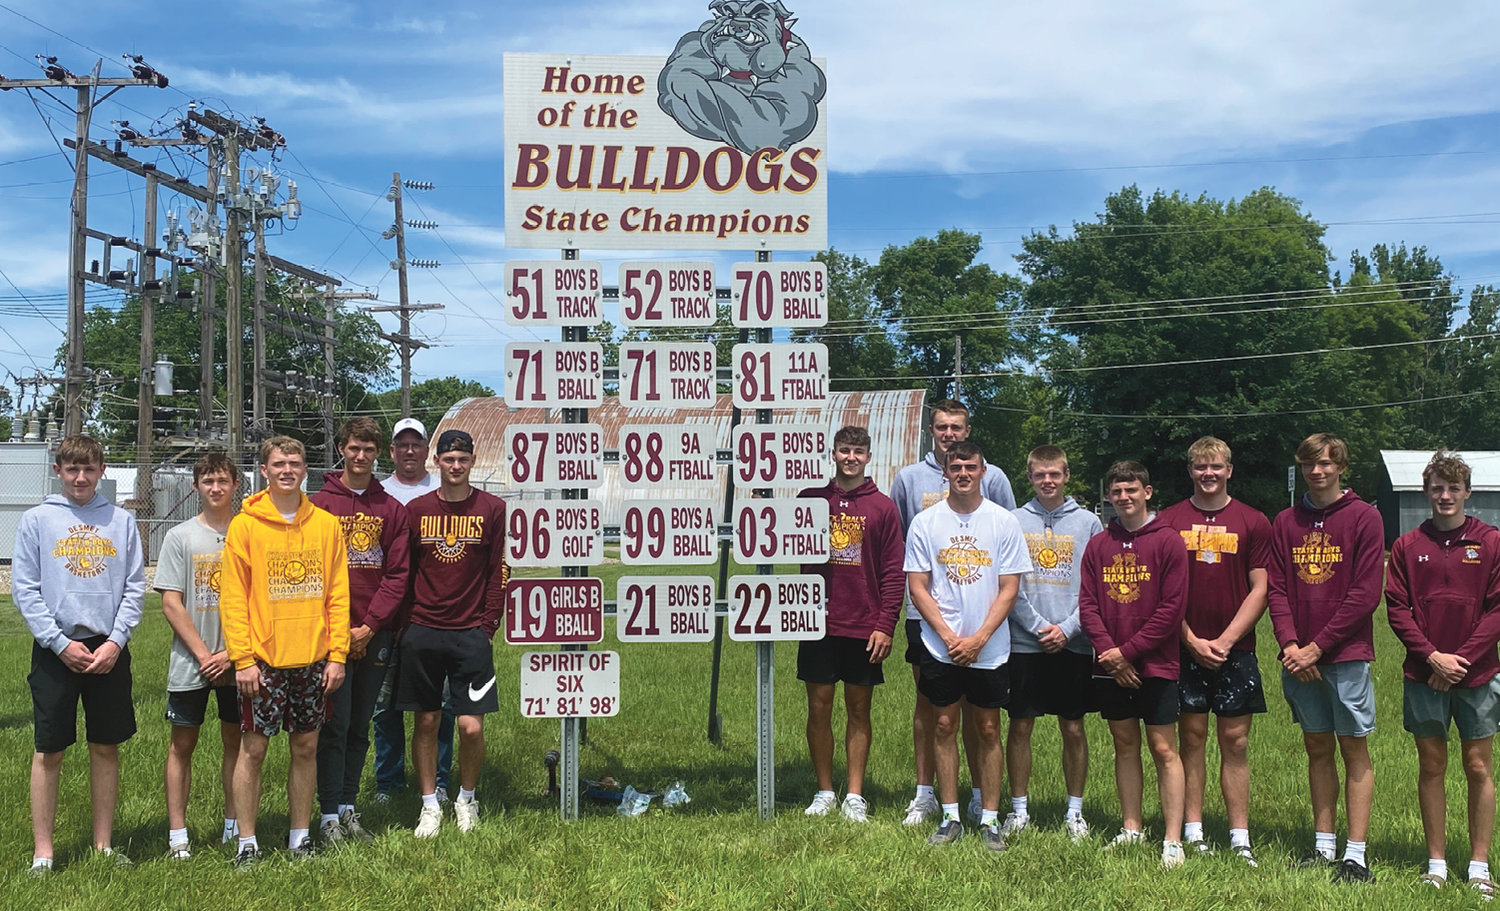 The 2022 Boys Basketball team added their championship marker to the sign on the east edge of De Smet on Saturday.